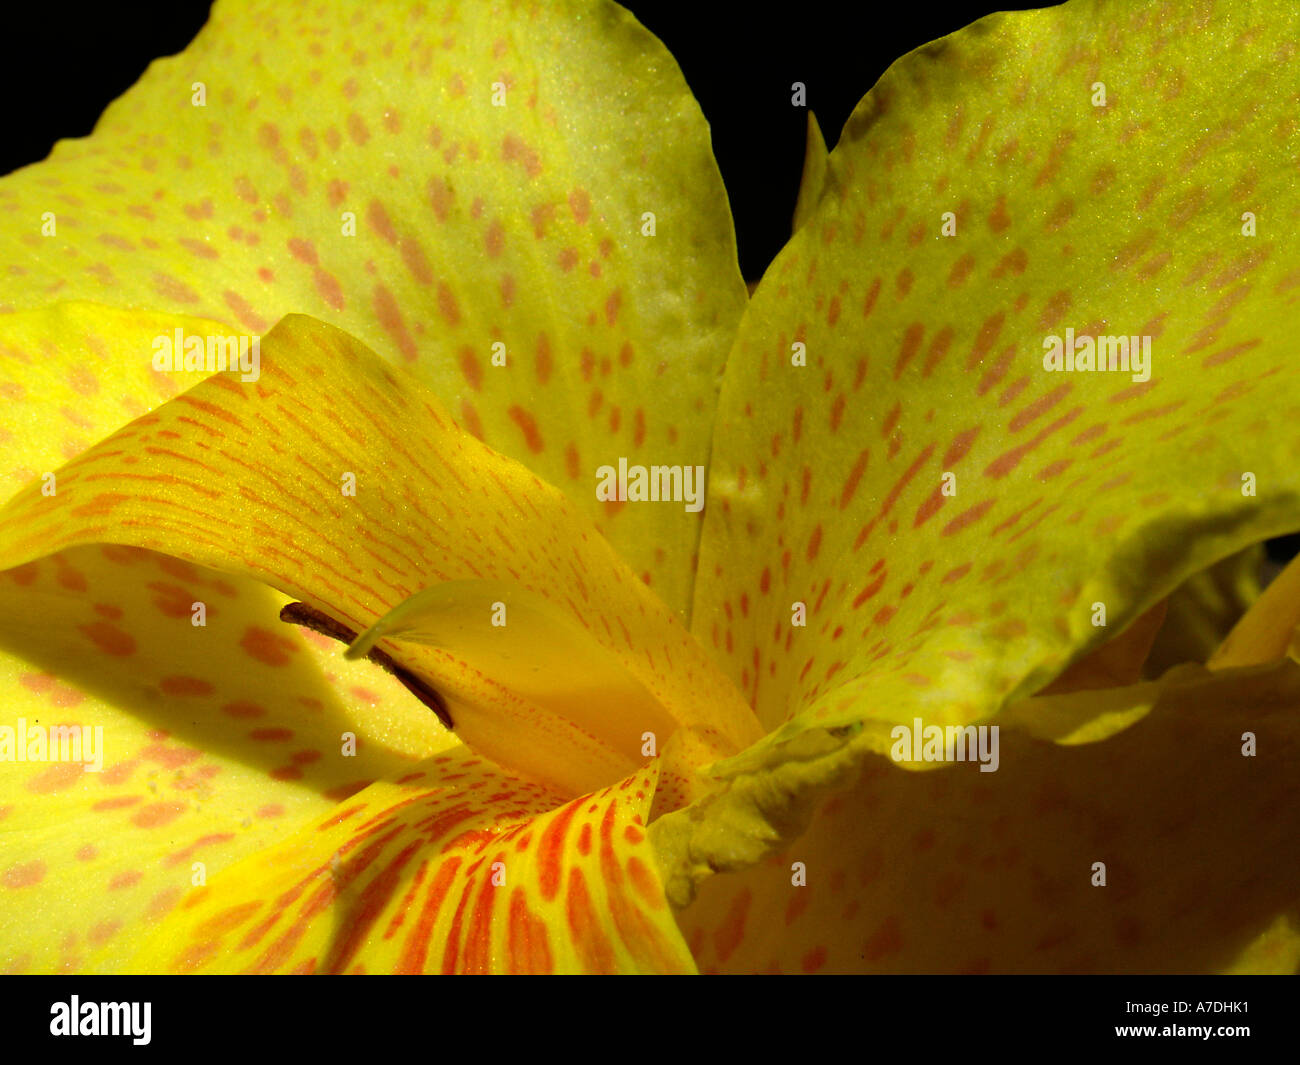 Close-up view of beautiful fresh yellow with orange spots tropical flower Stock Photo